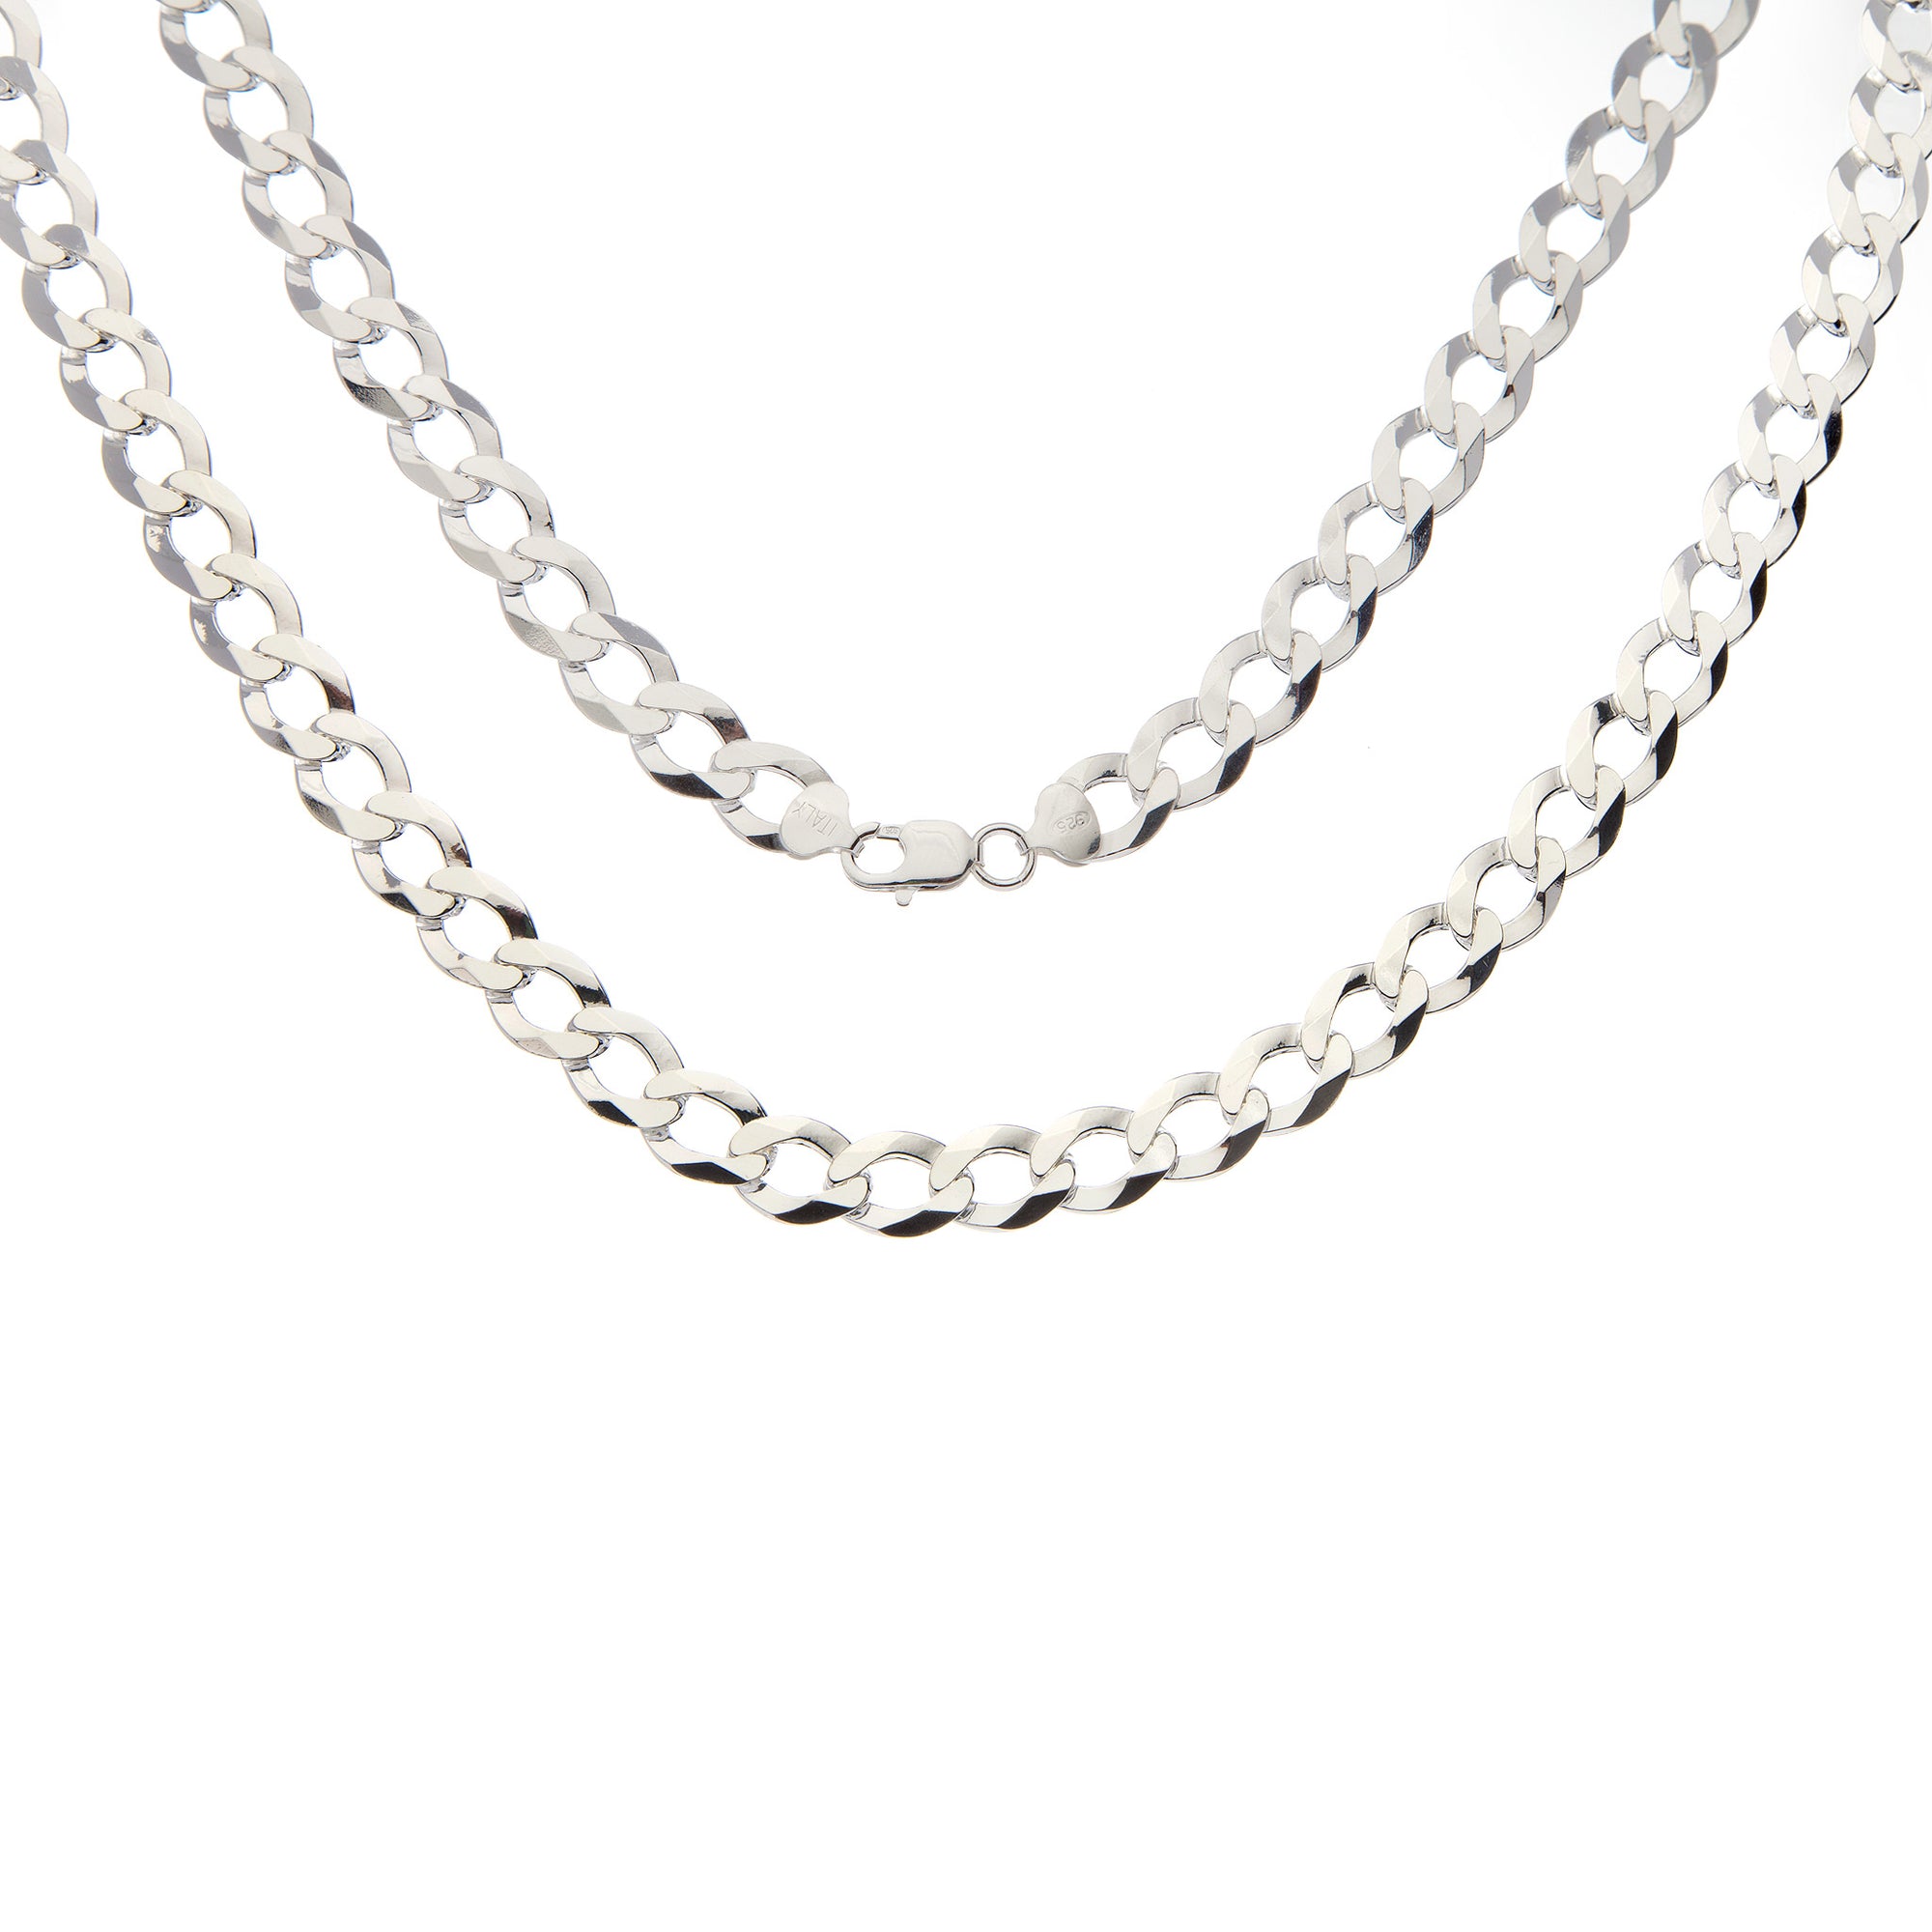 11mm Silver Oval Flat Curb Necklace - Brighton Silver